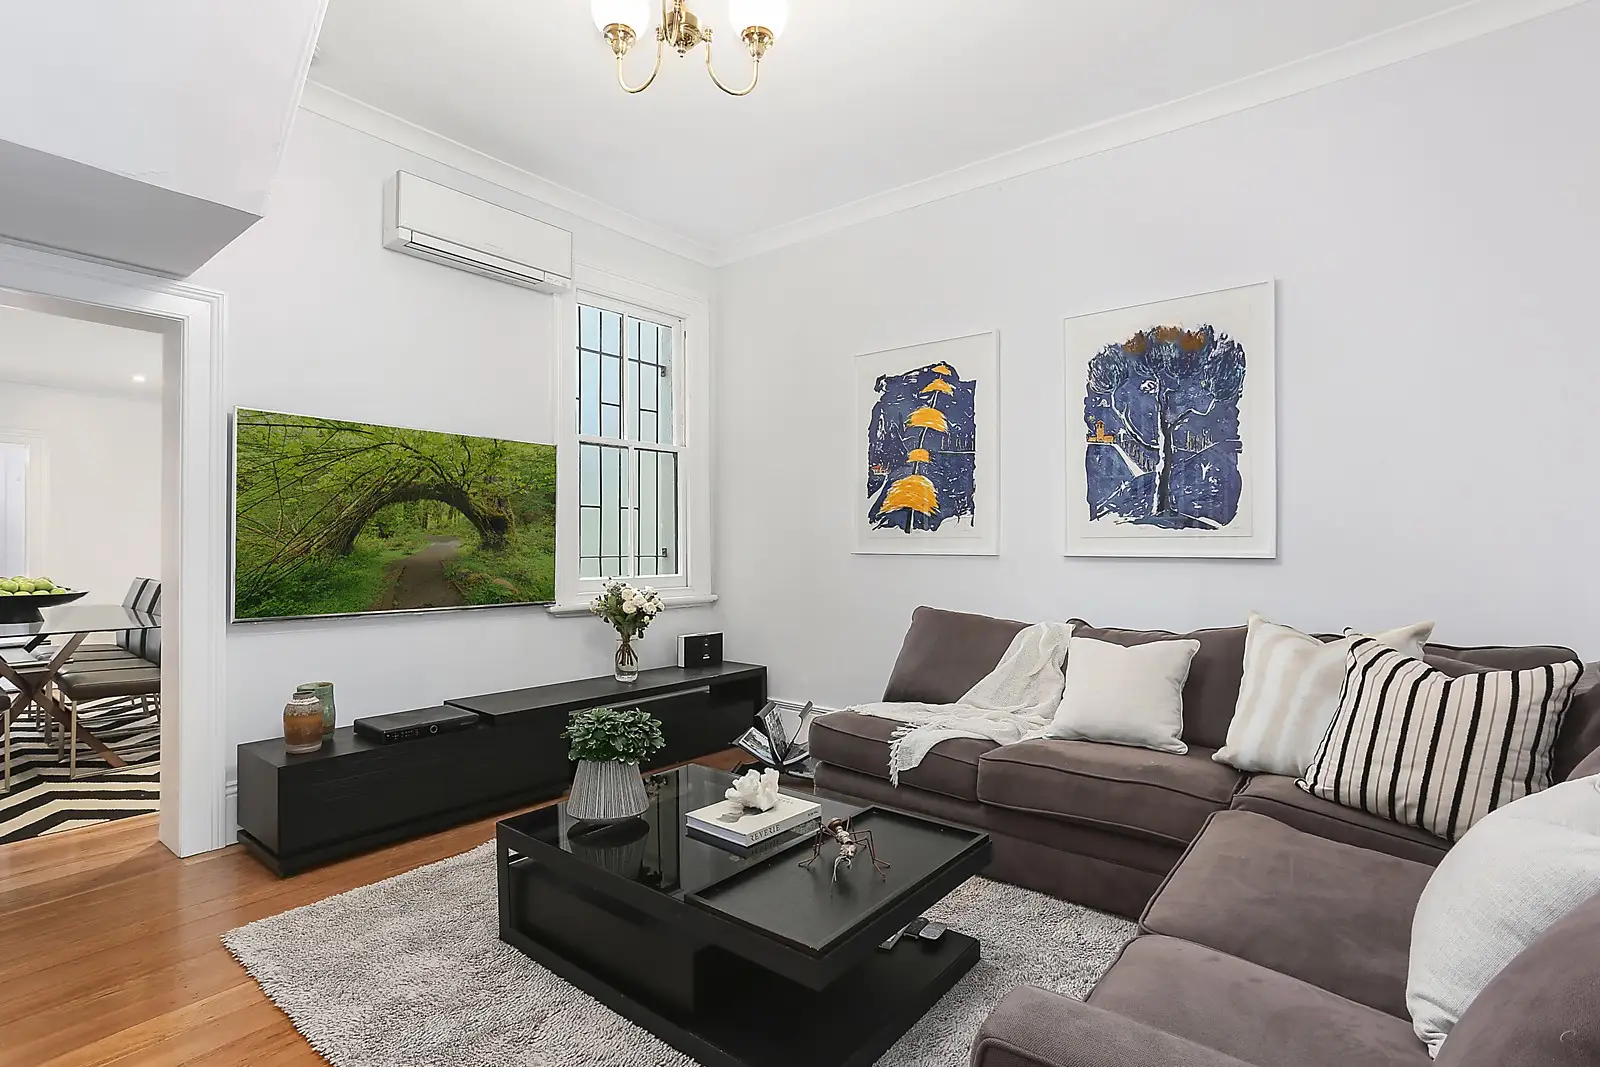 Photo #2: 31 Nobbs Street, Surry Hills - Sold by Sydney Sotheby's International Realty